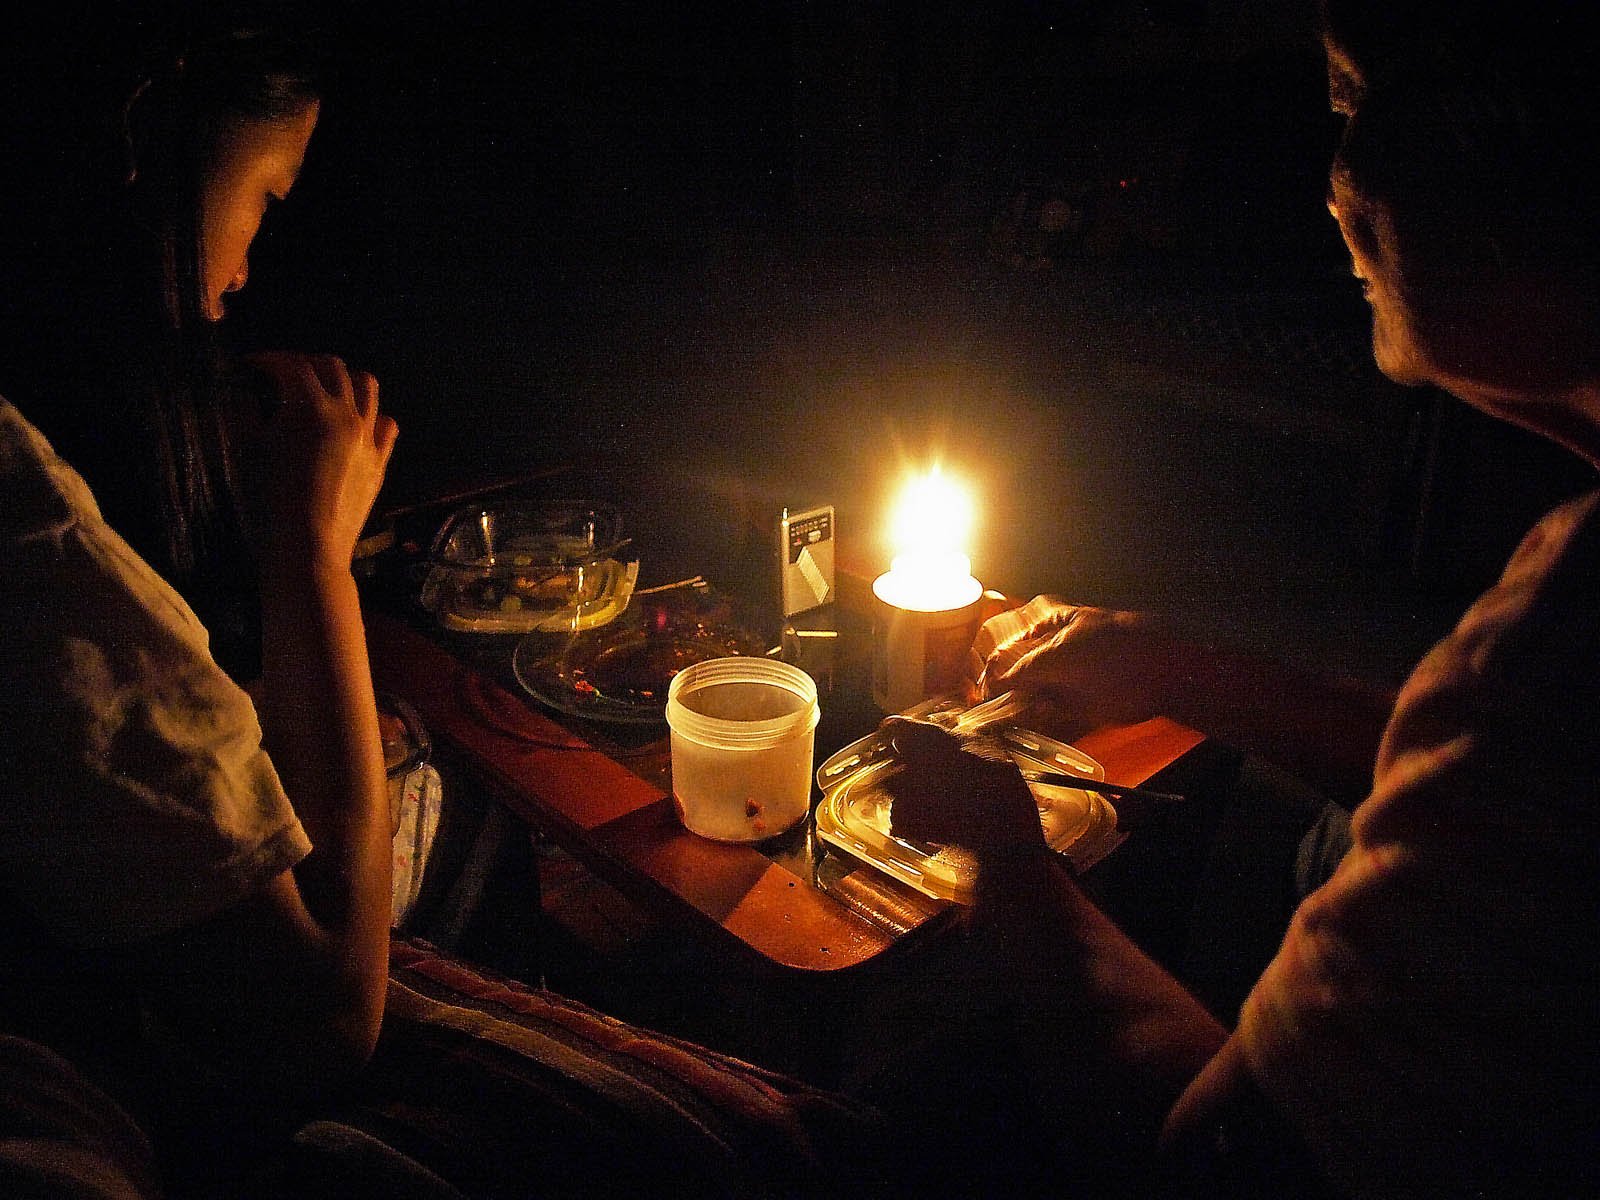 Energy policy group issues guidance to avert another widespread blackout on Panay Island